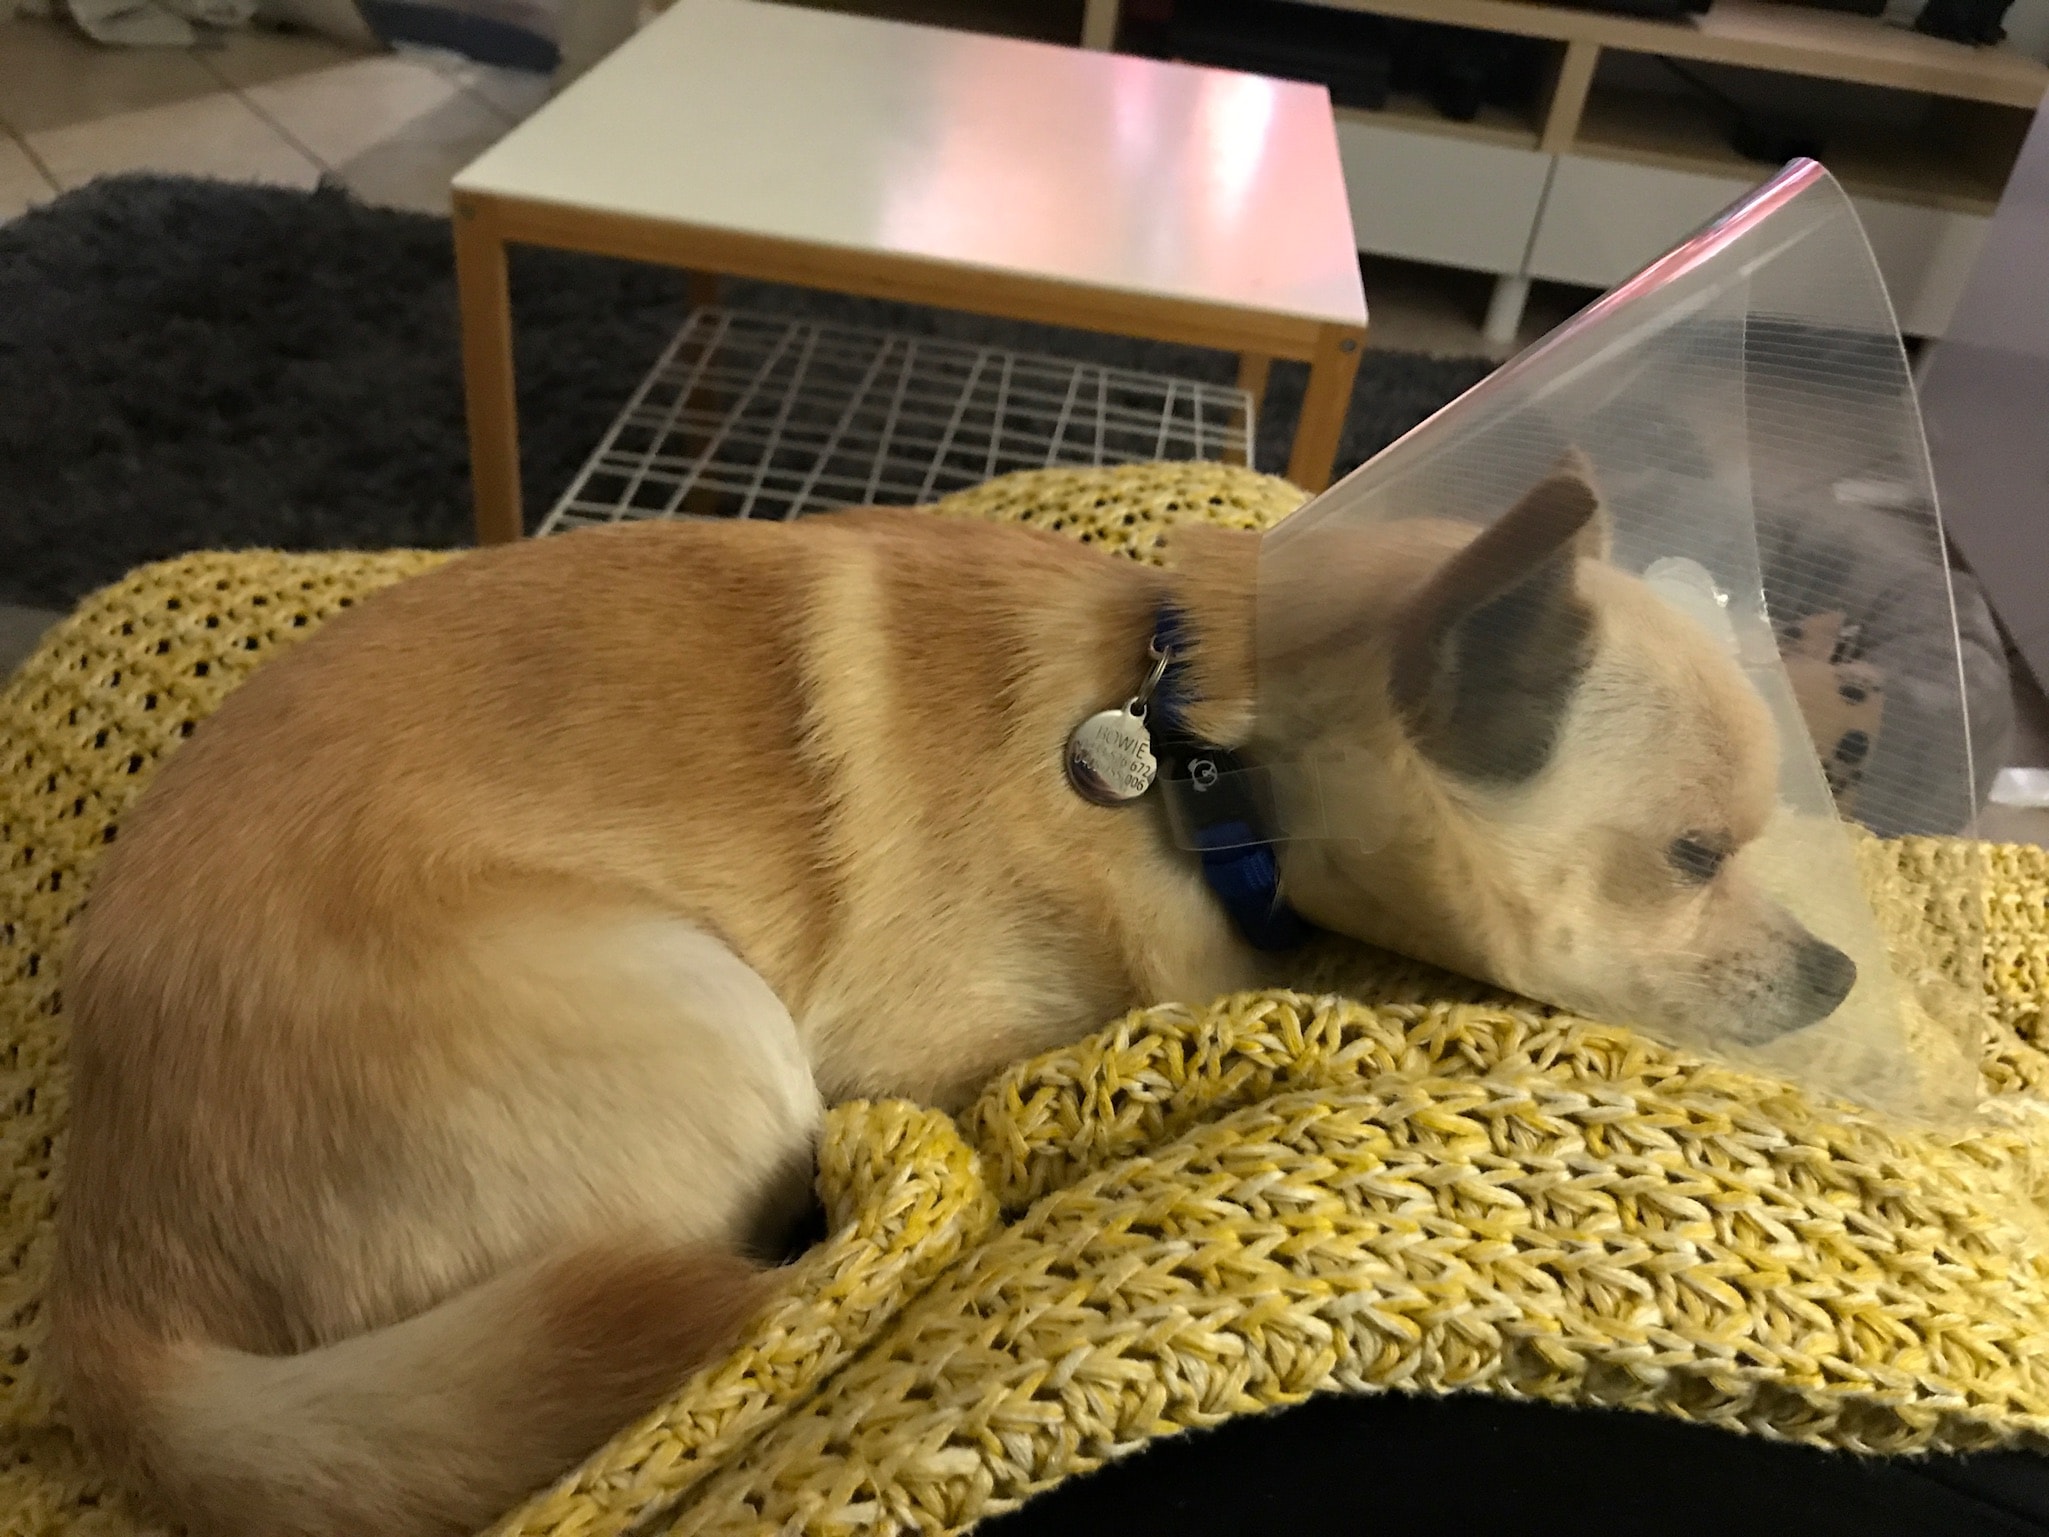 how do i make my dog comfortable after surgery